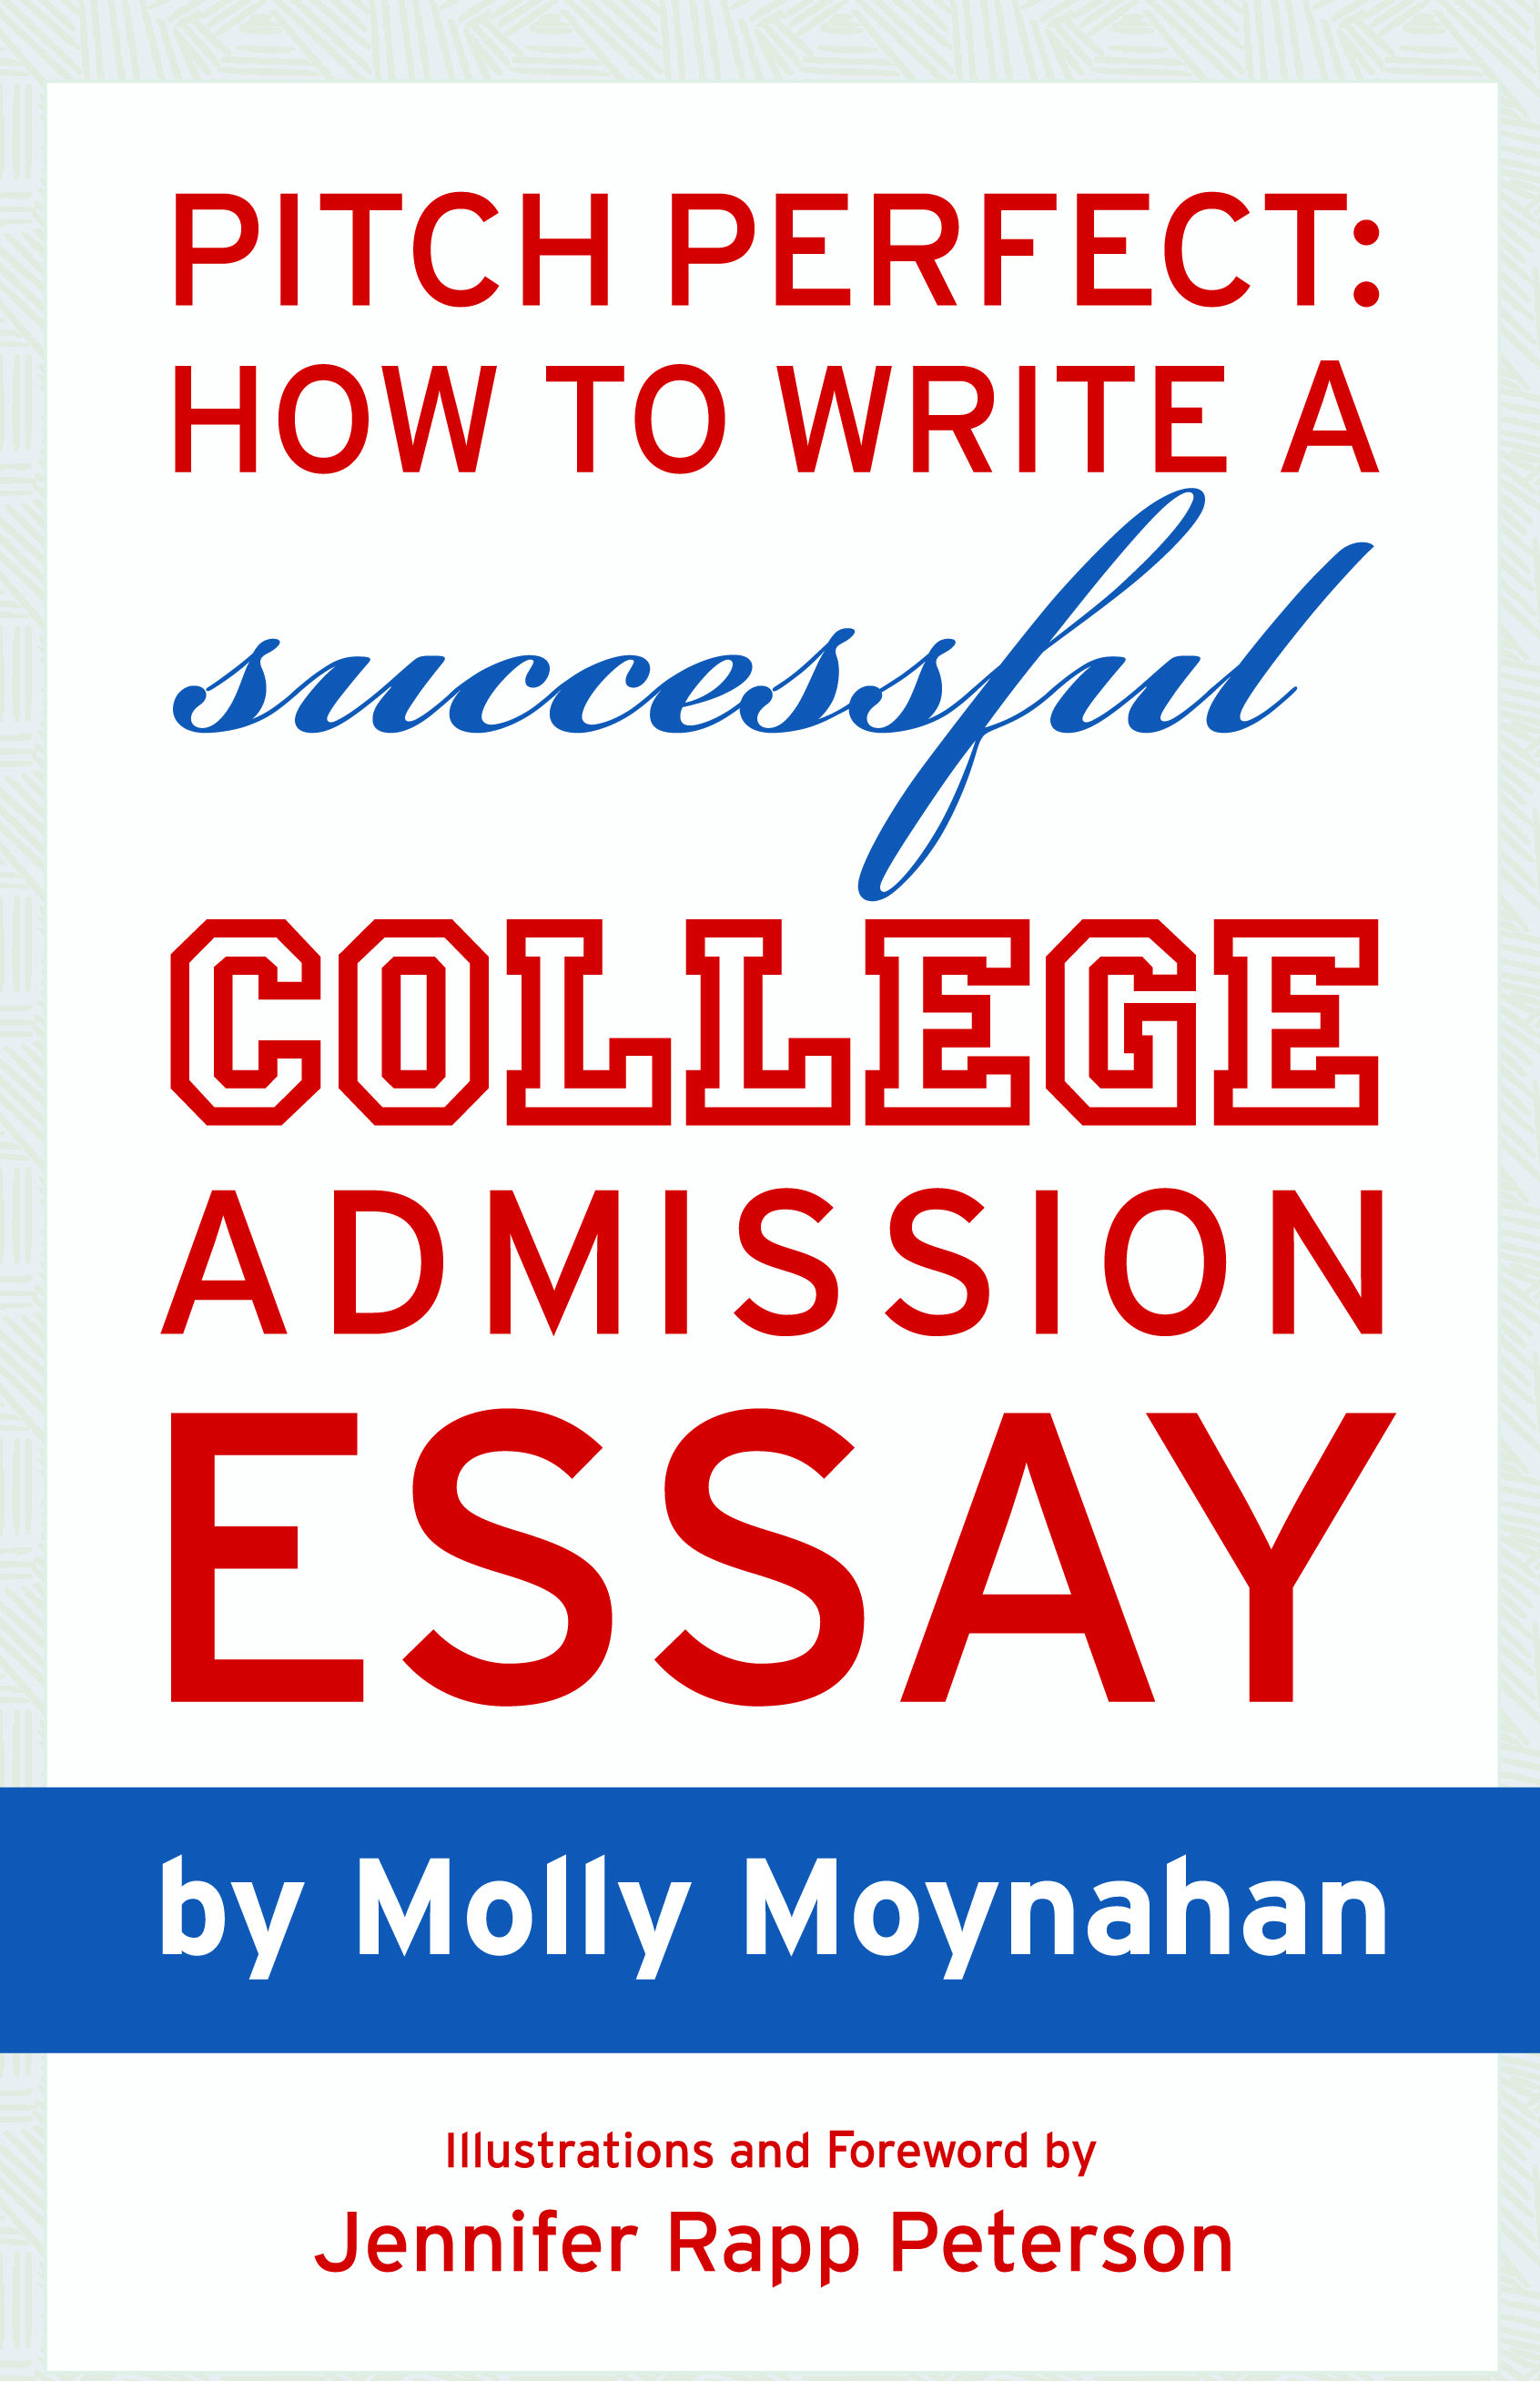 quotes to start your college essay